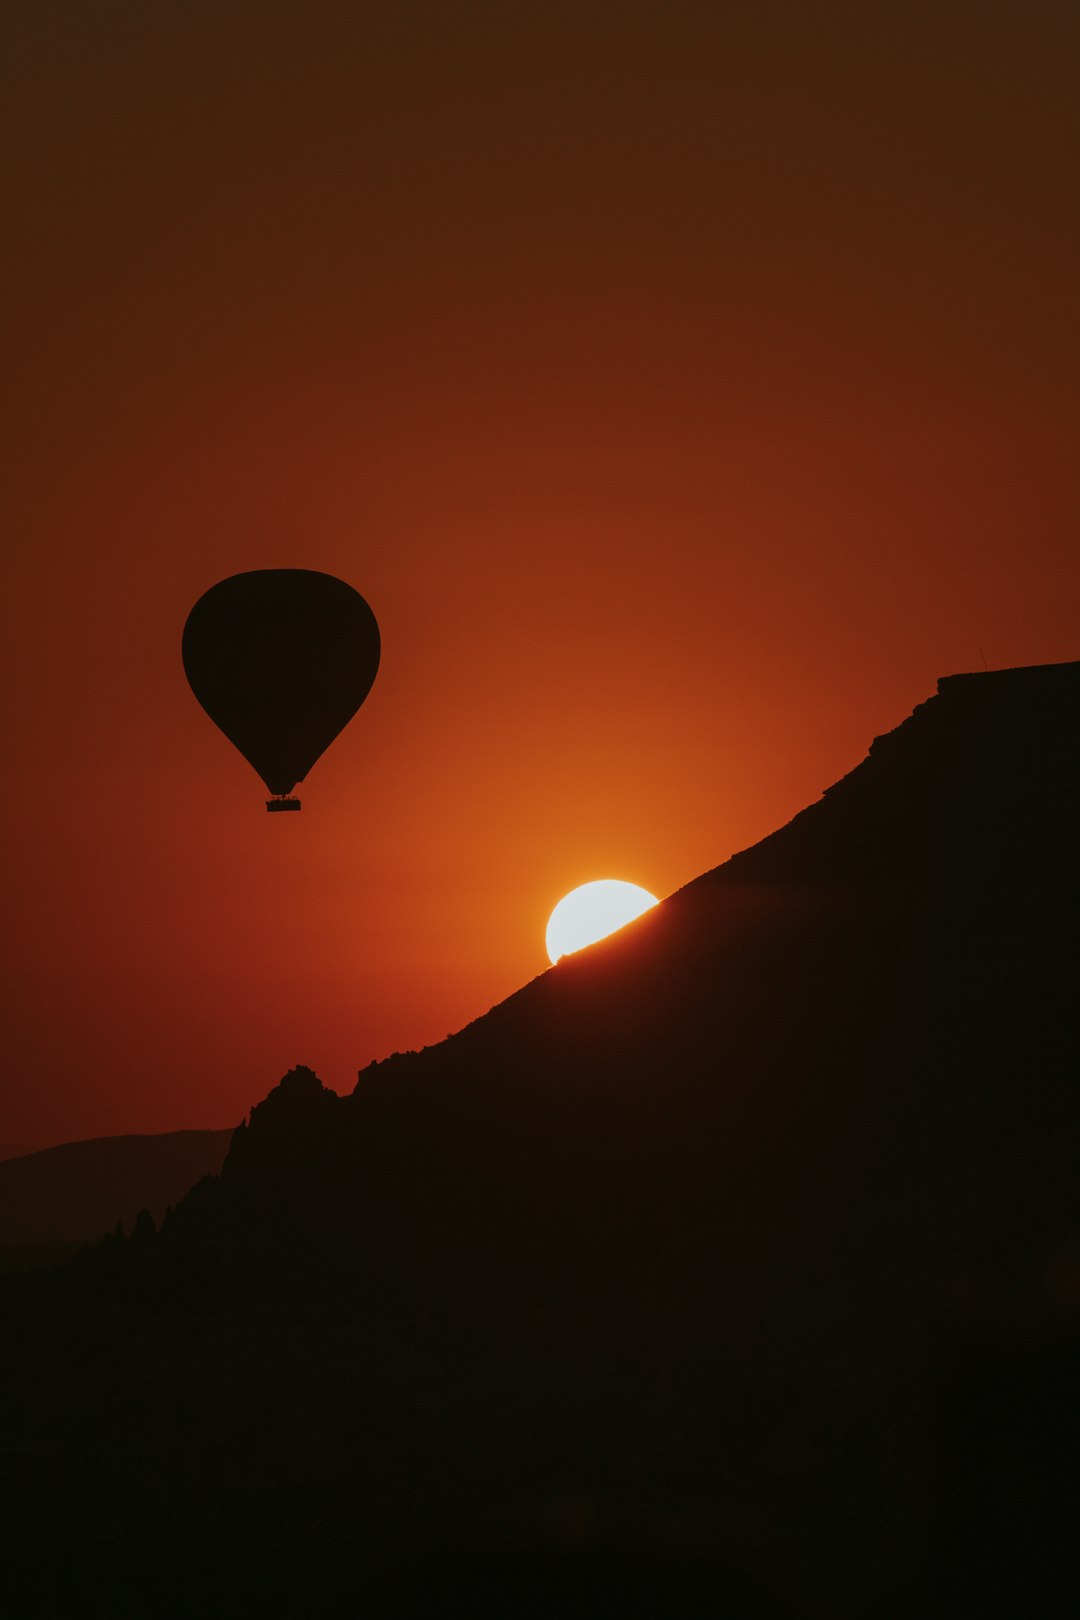 silhouette of hot air balloon during sunset